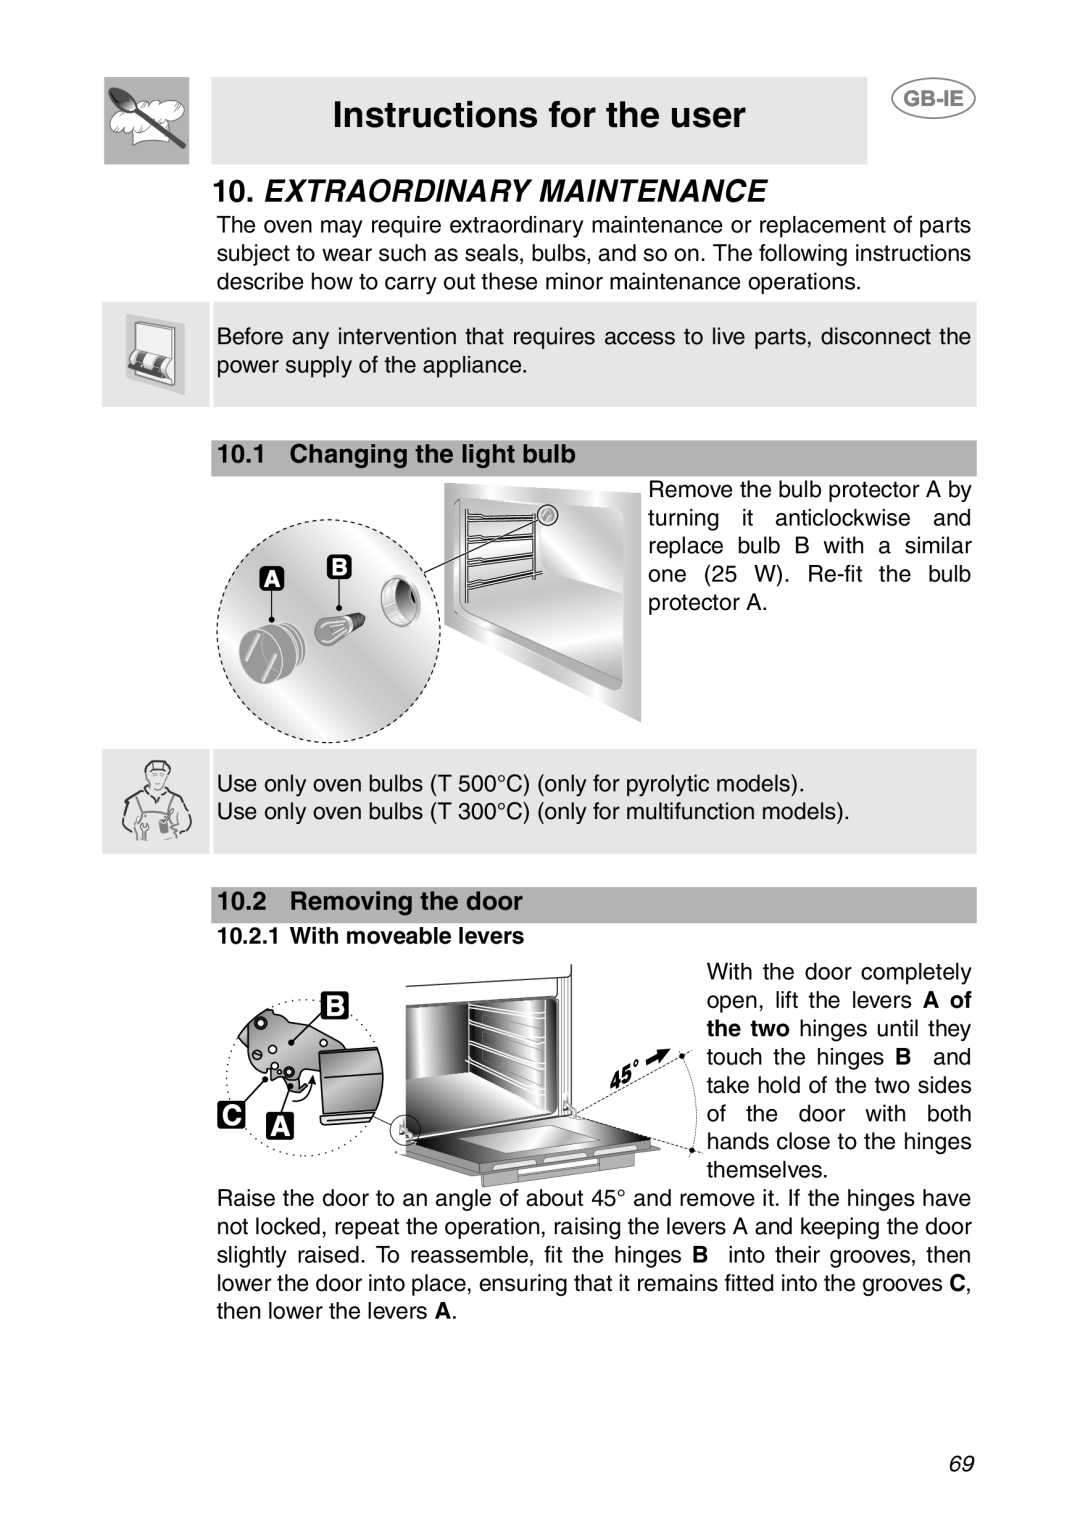 Smeg SCP111-1, SCP111NE1, SCP111EB1 manual Extraordinary Maintenance, Changing the light bulb, Instructions for the user 